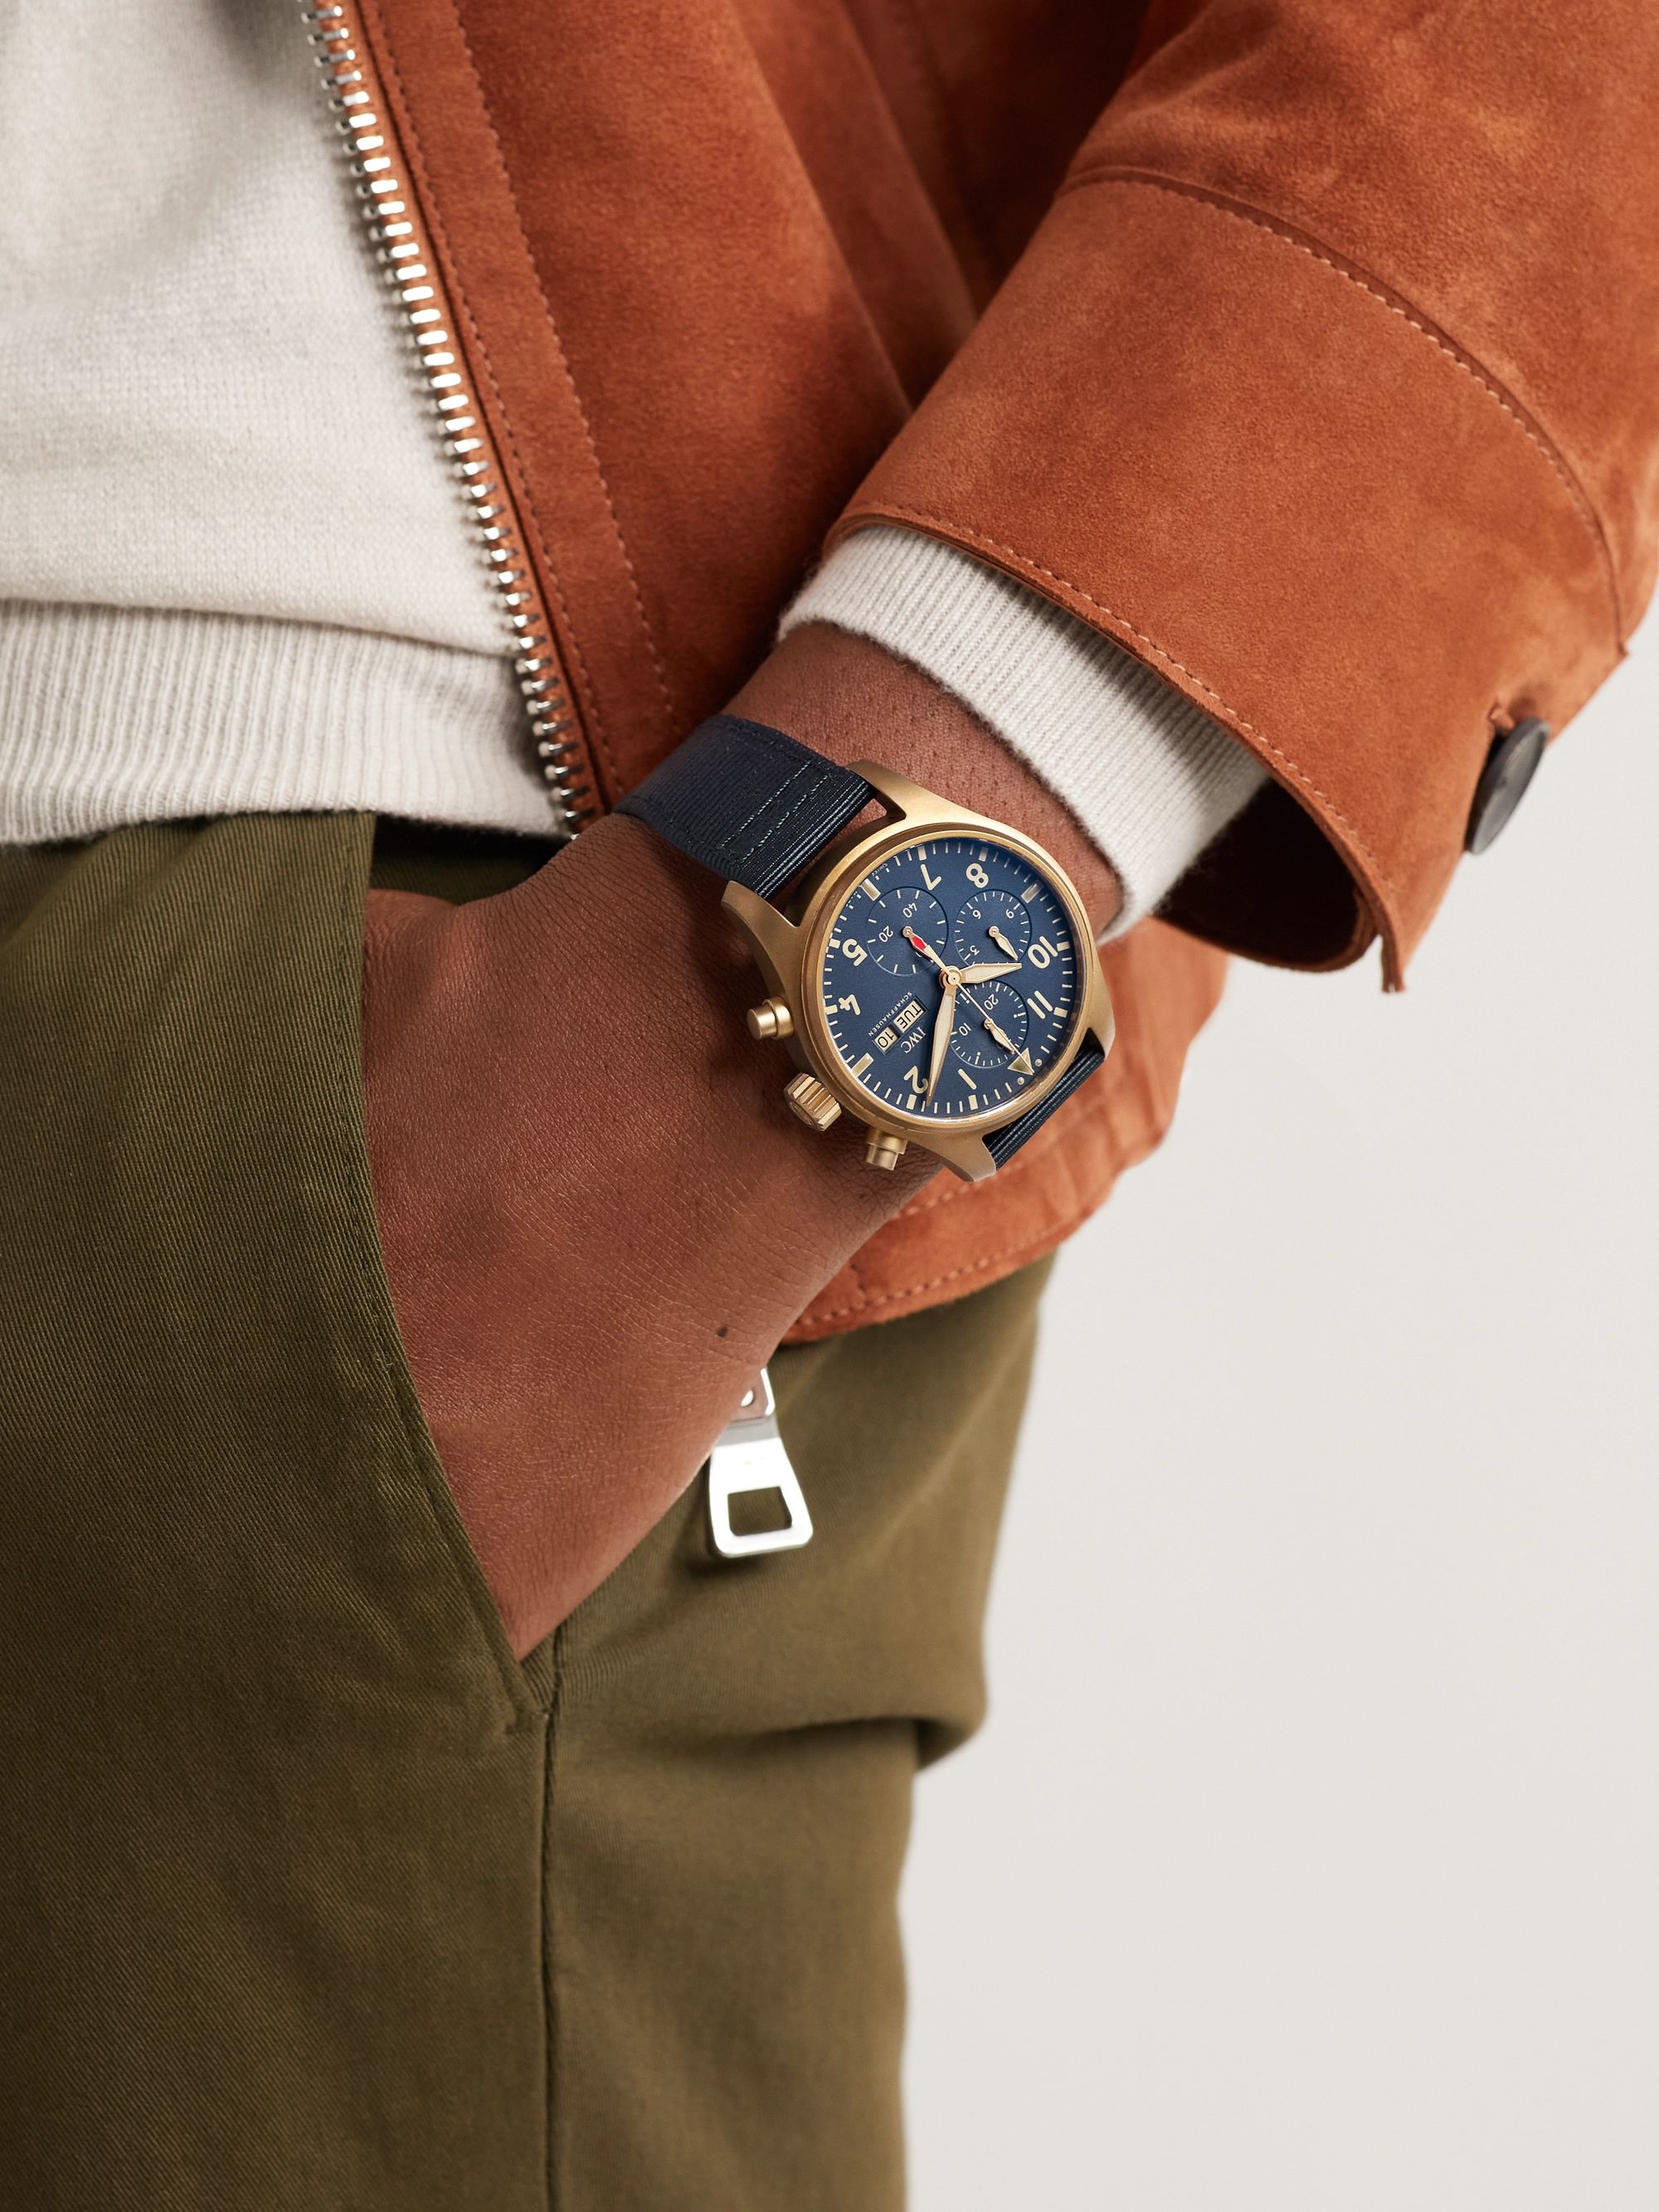 IWC SCHAFFHAUSEN Pilot's Automatic Chronograph 41mm Bronze and Textile Watch, Ref. No. IW388109